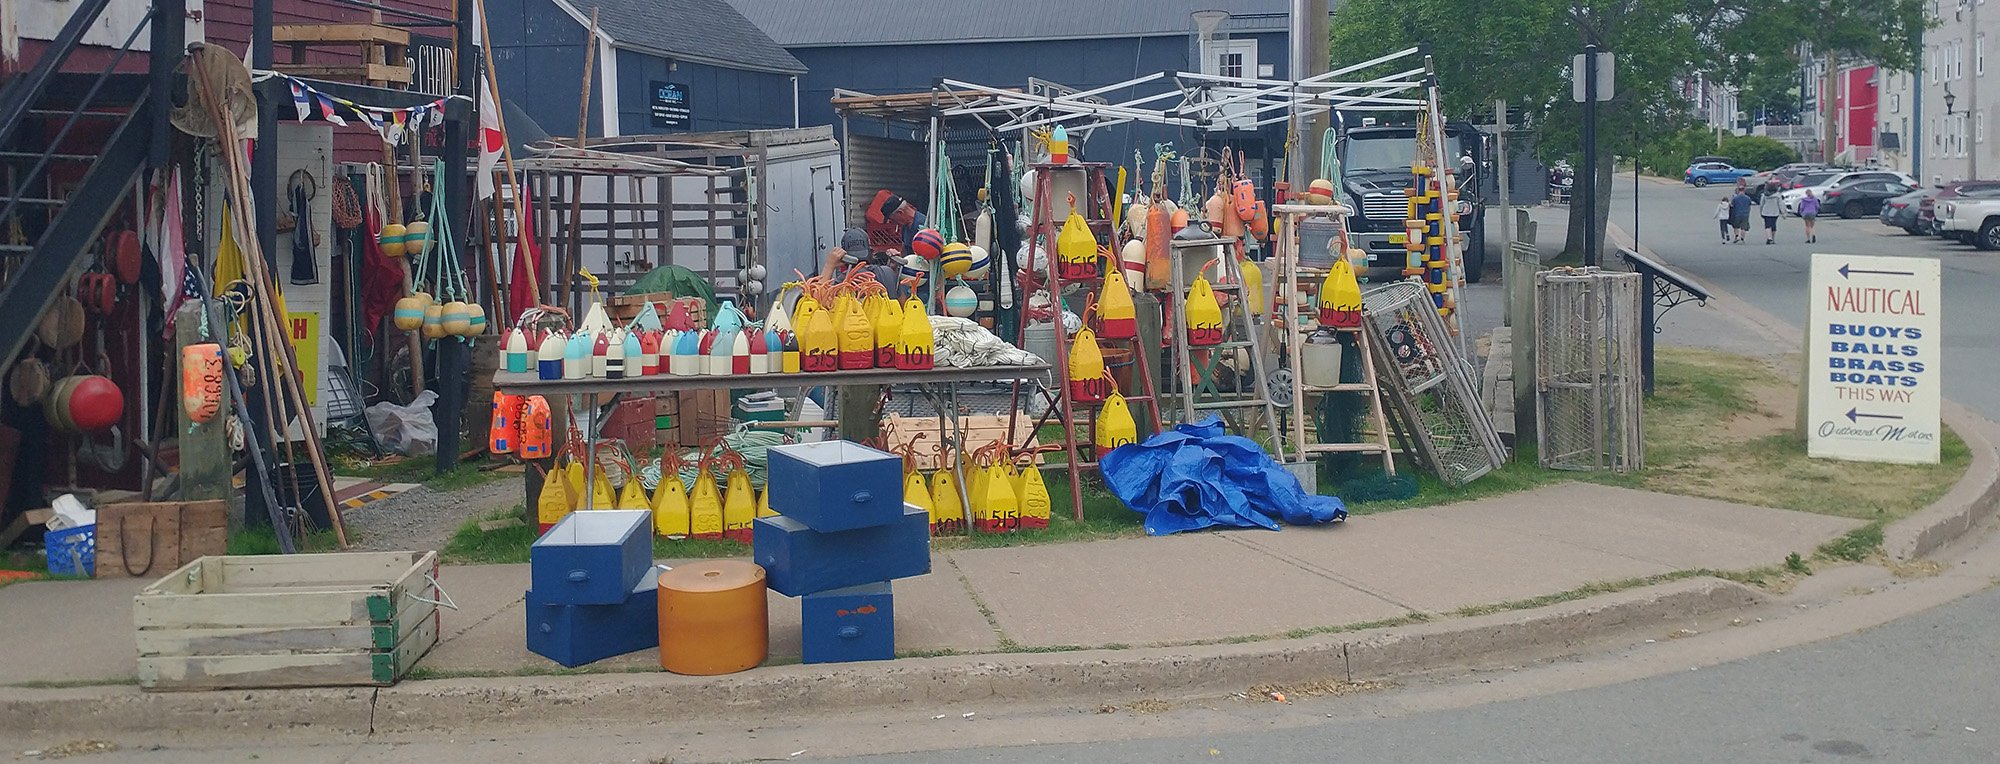 Some kind of buoy souvenir store? That's pretty original. No I didn't buy one, don't get your hopes up.